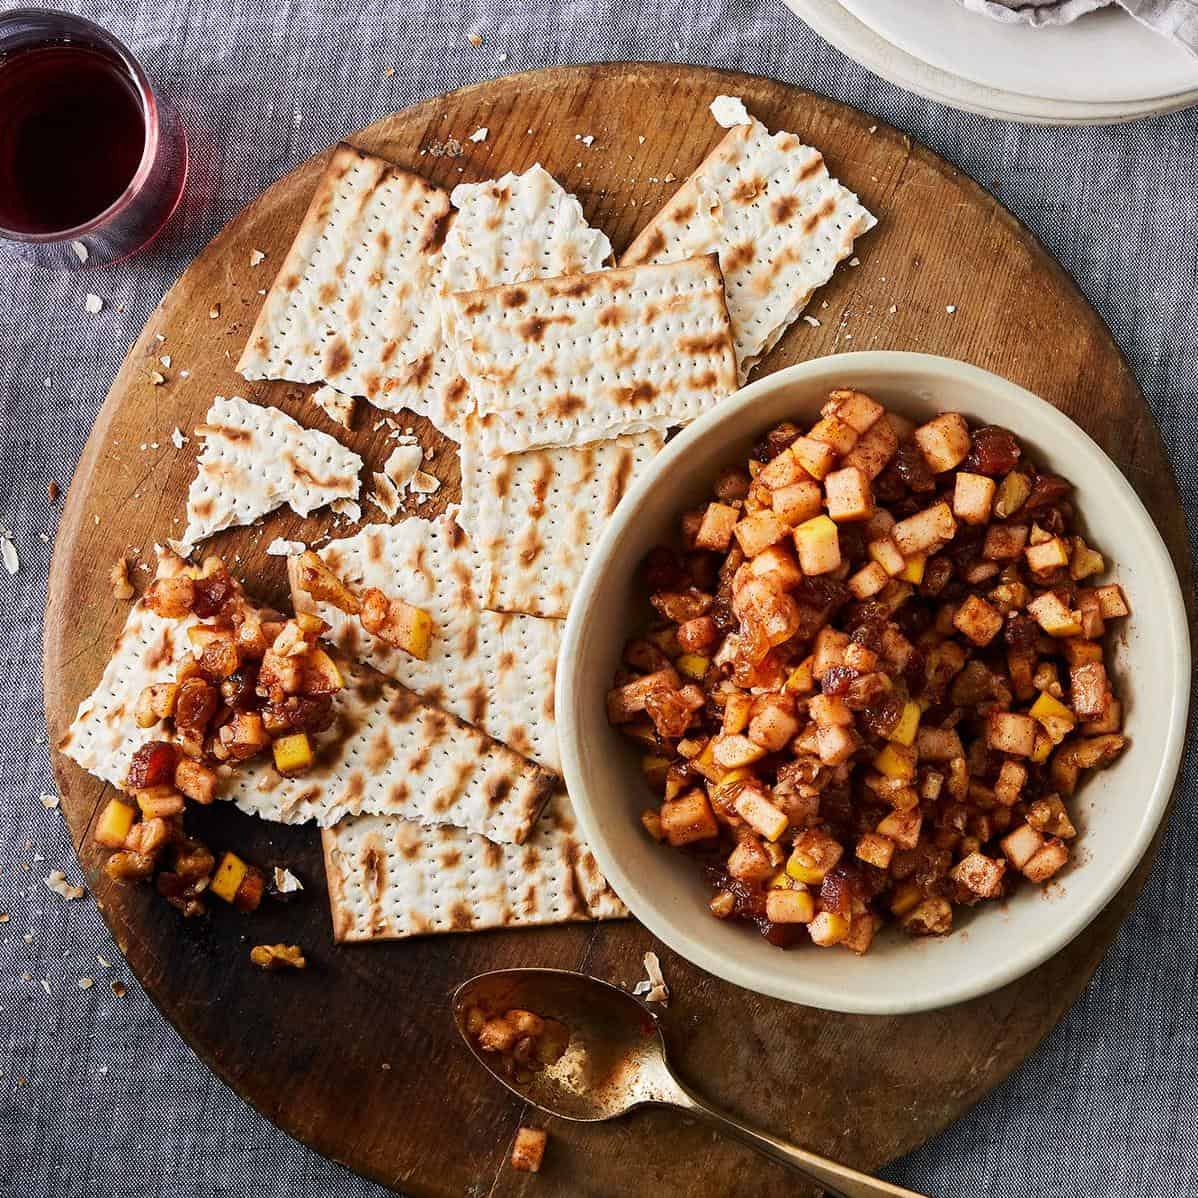  Perfect for Passover, or any time of the year!